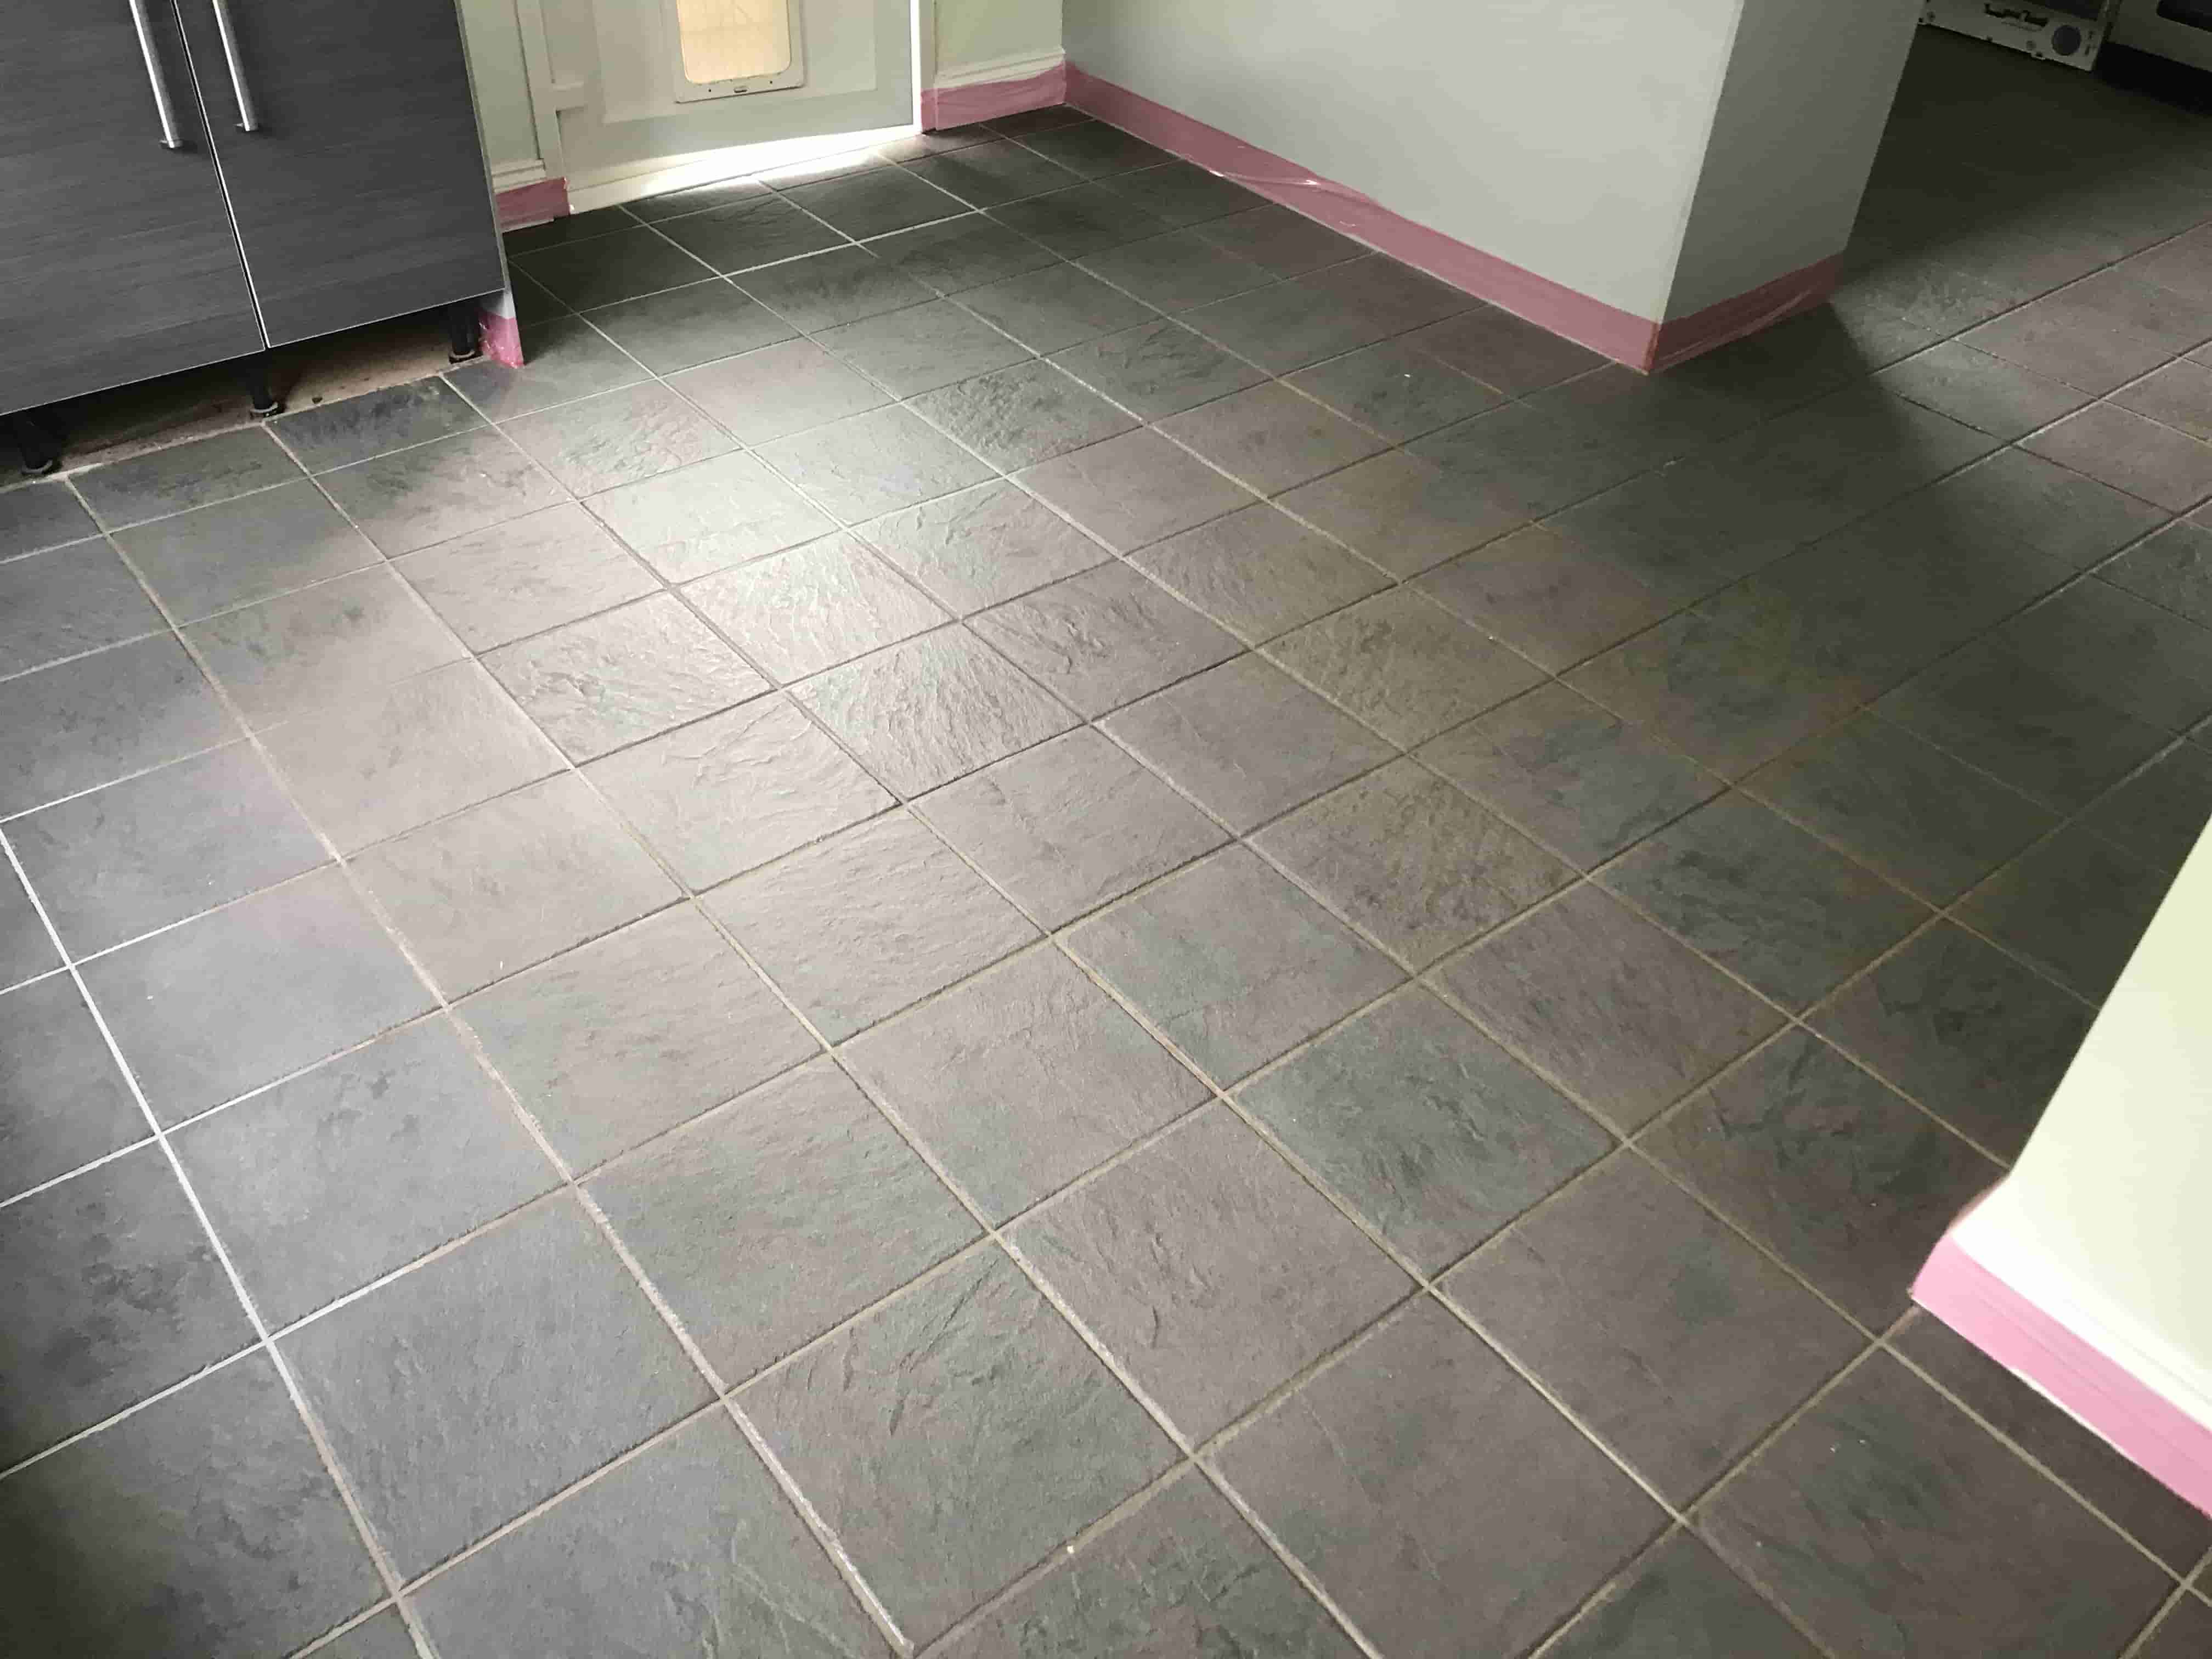 Ceramic Tiled Kitchen Floor Stained With Grout Haze Before Cleaning Sandhurst